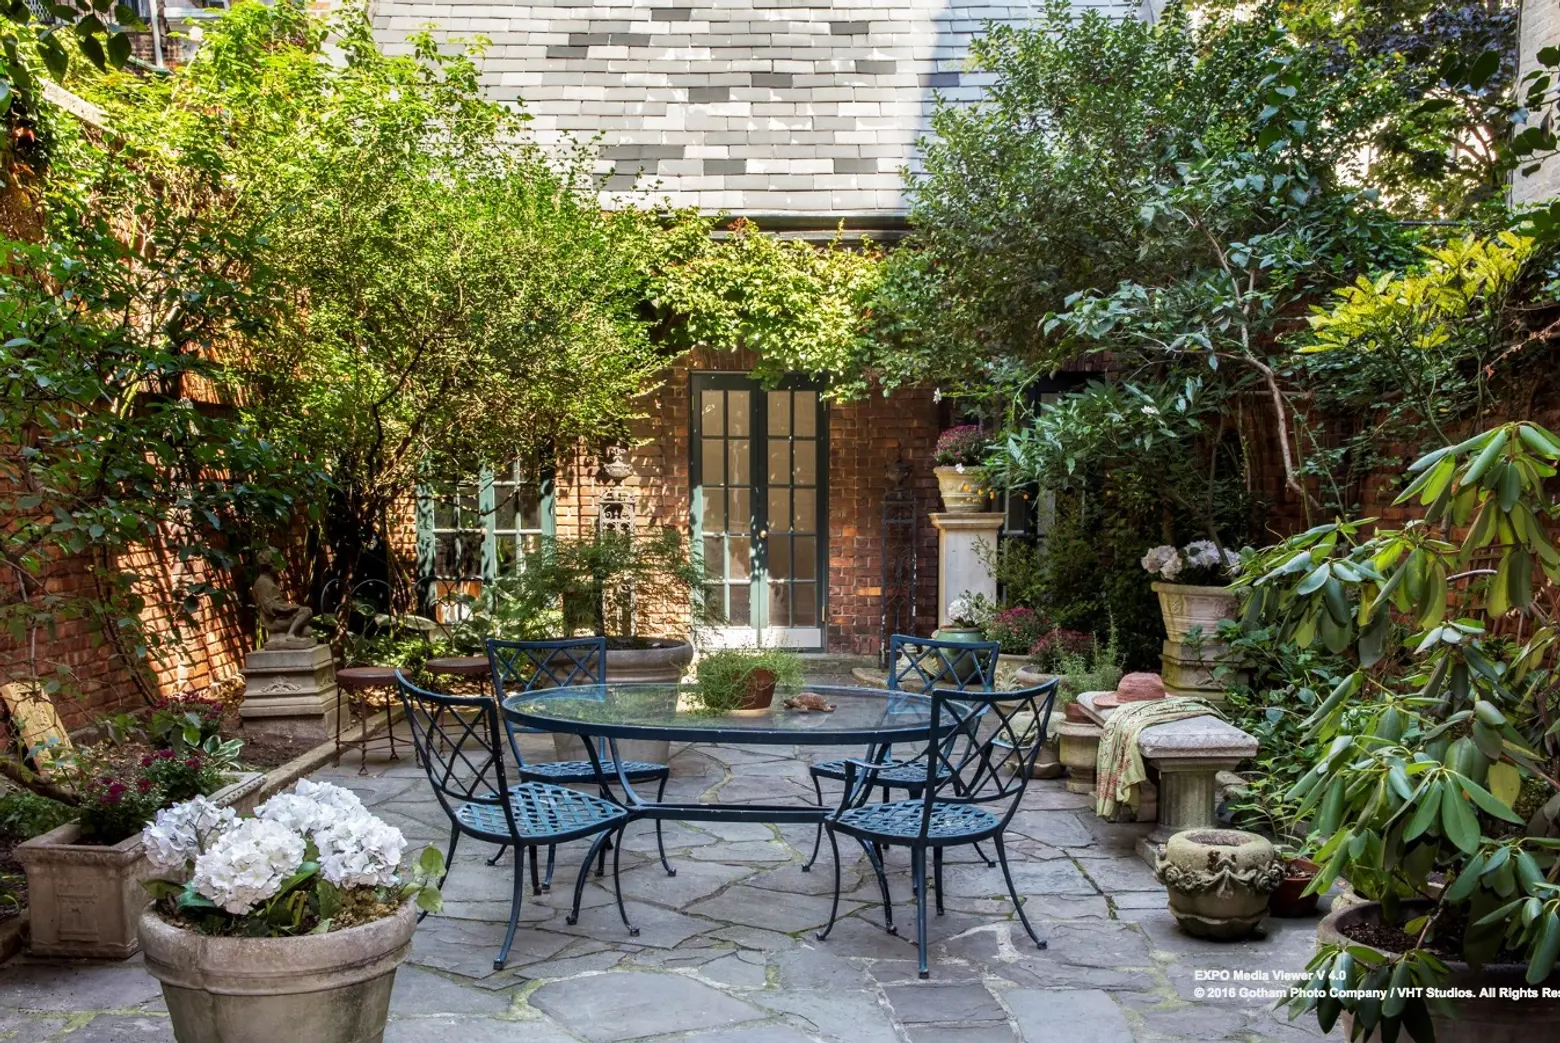 $16.8M Village townhouse has details, a celebrity history–and a secret artists’ cottage in back